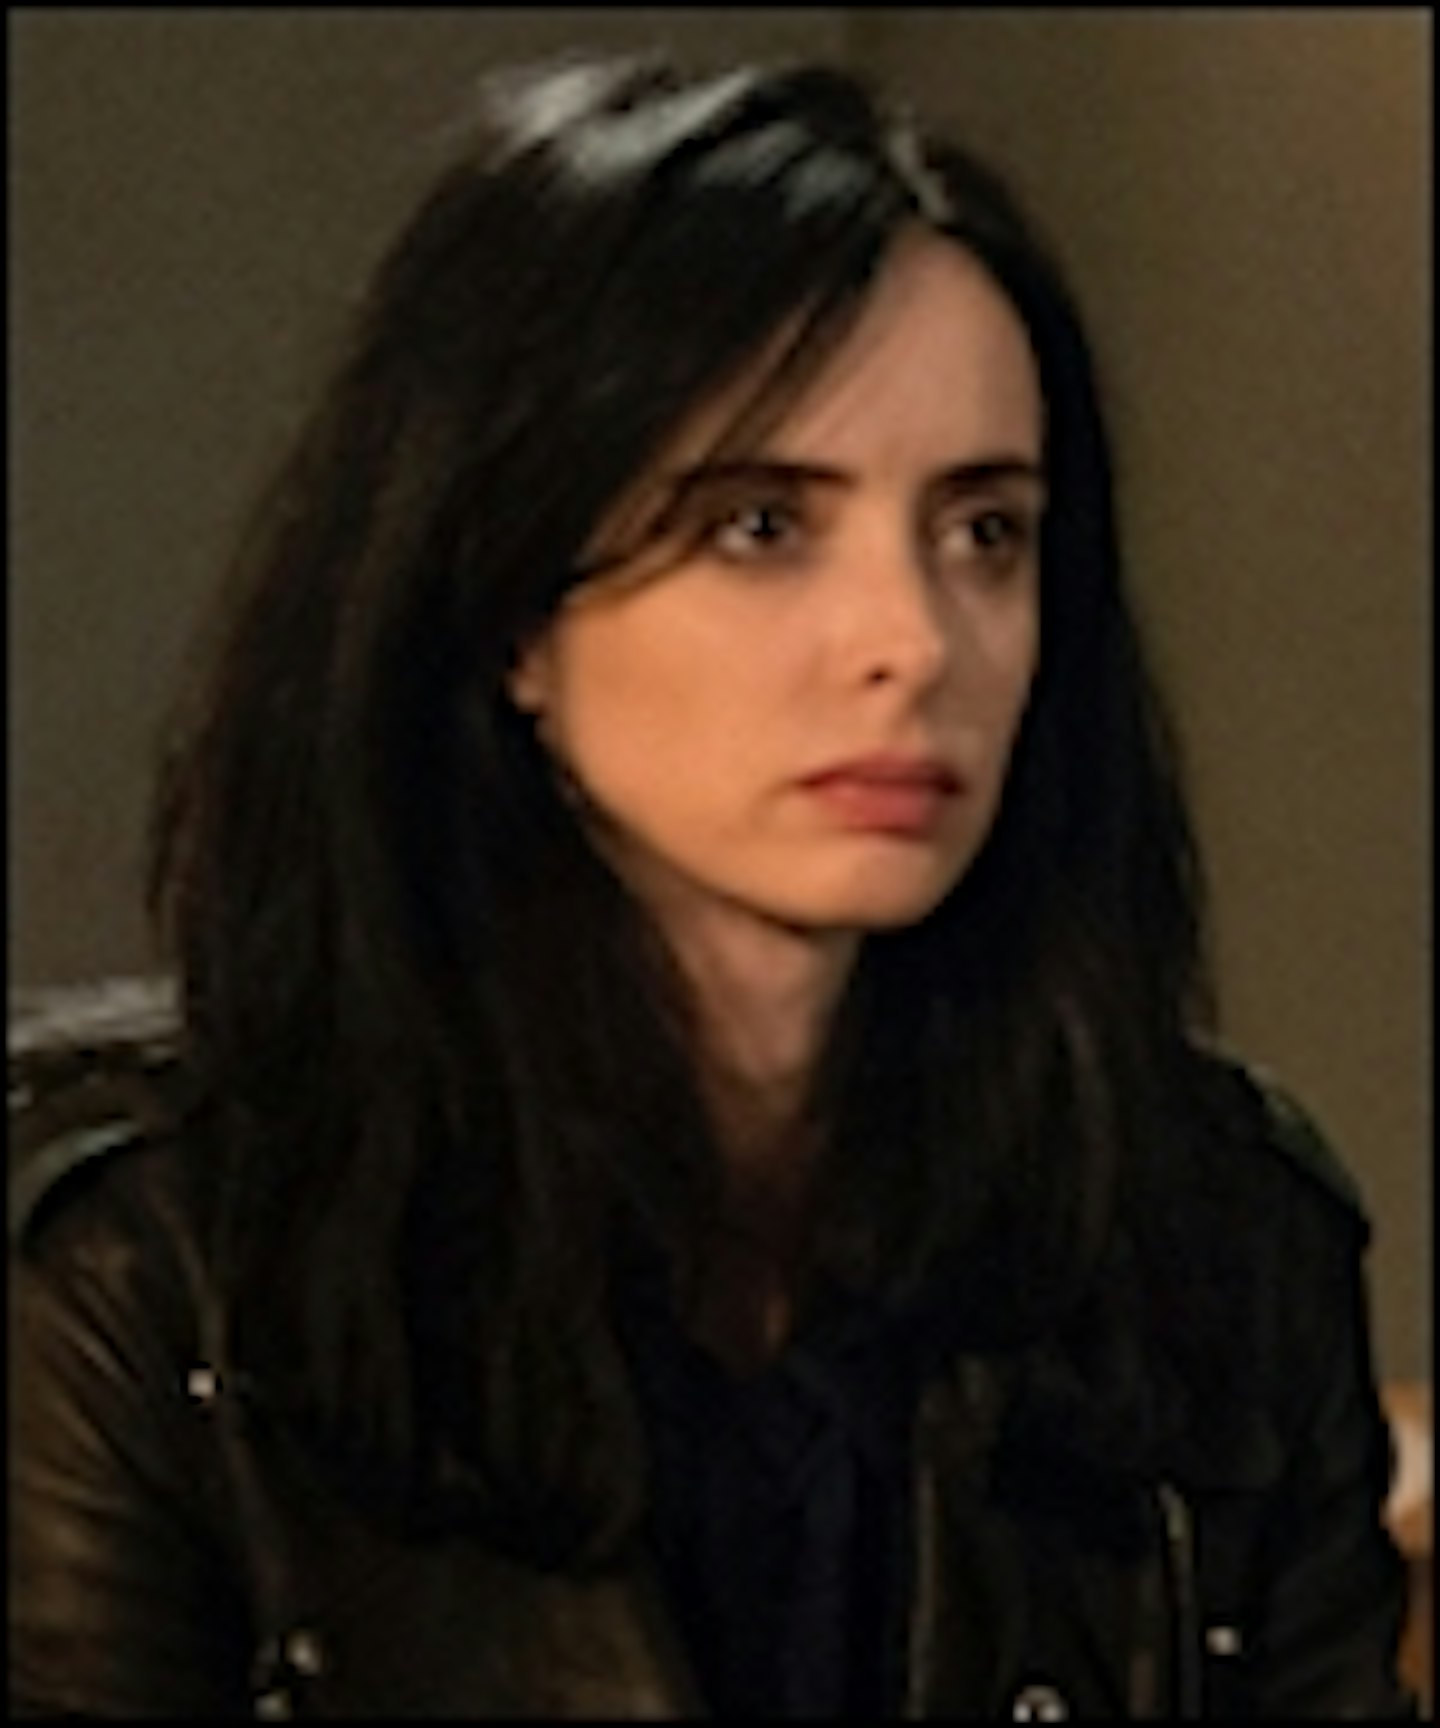 Jessica Jones Goes To Work In A New Netflix Promo